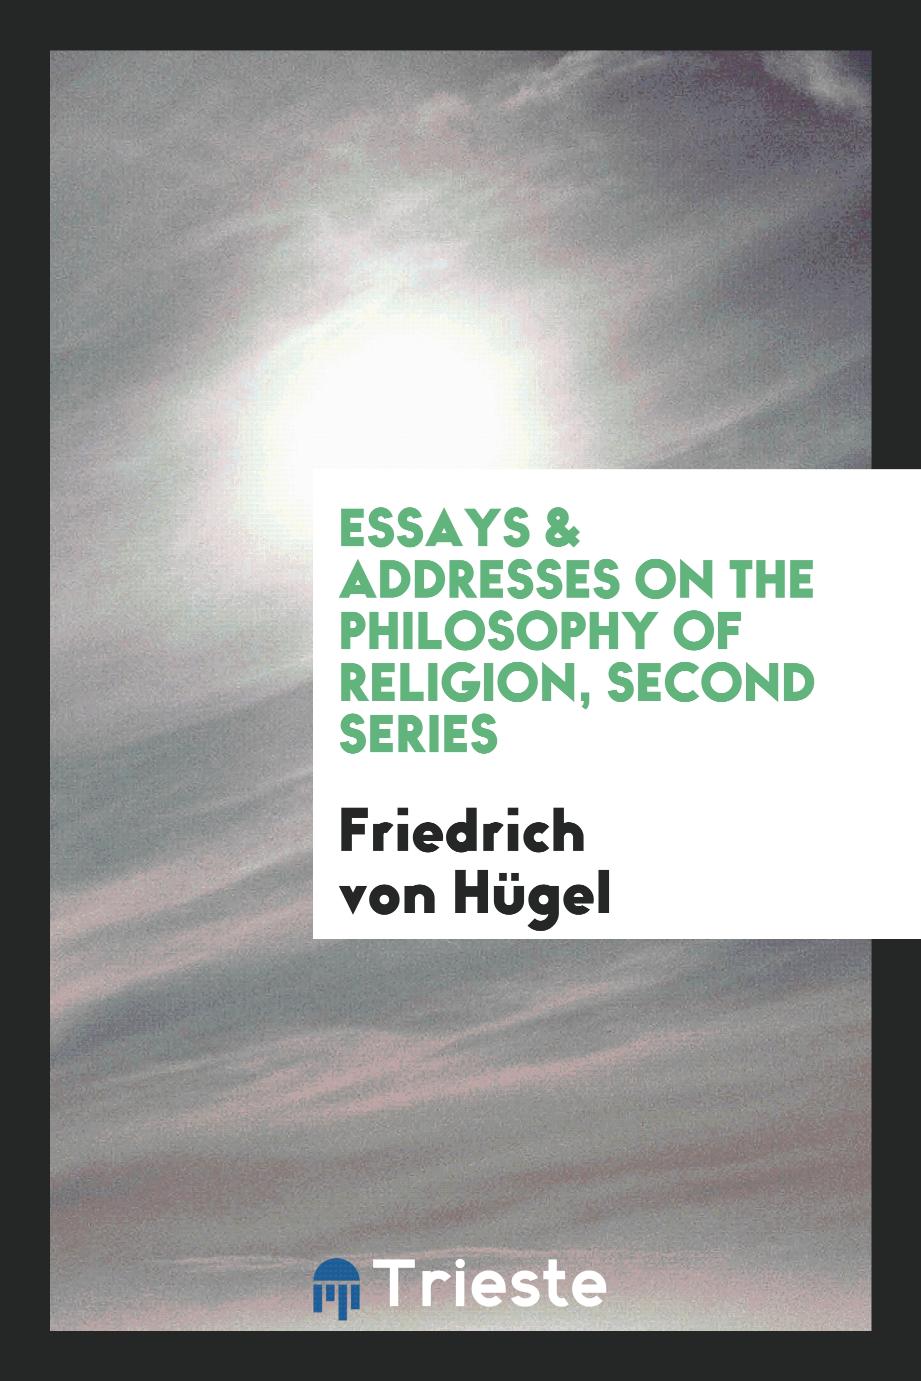 Essays & Addresses on the Philosophy of Religion, Second Series